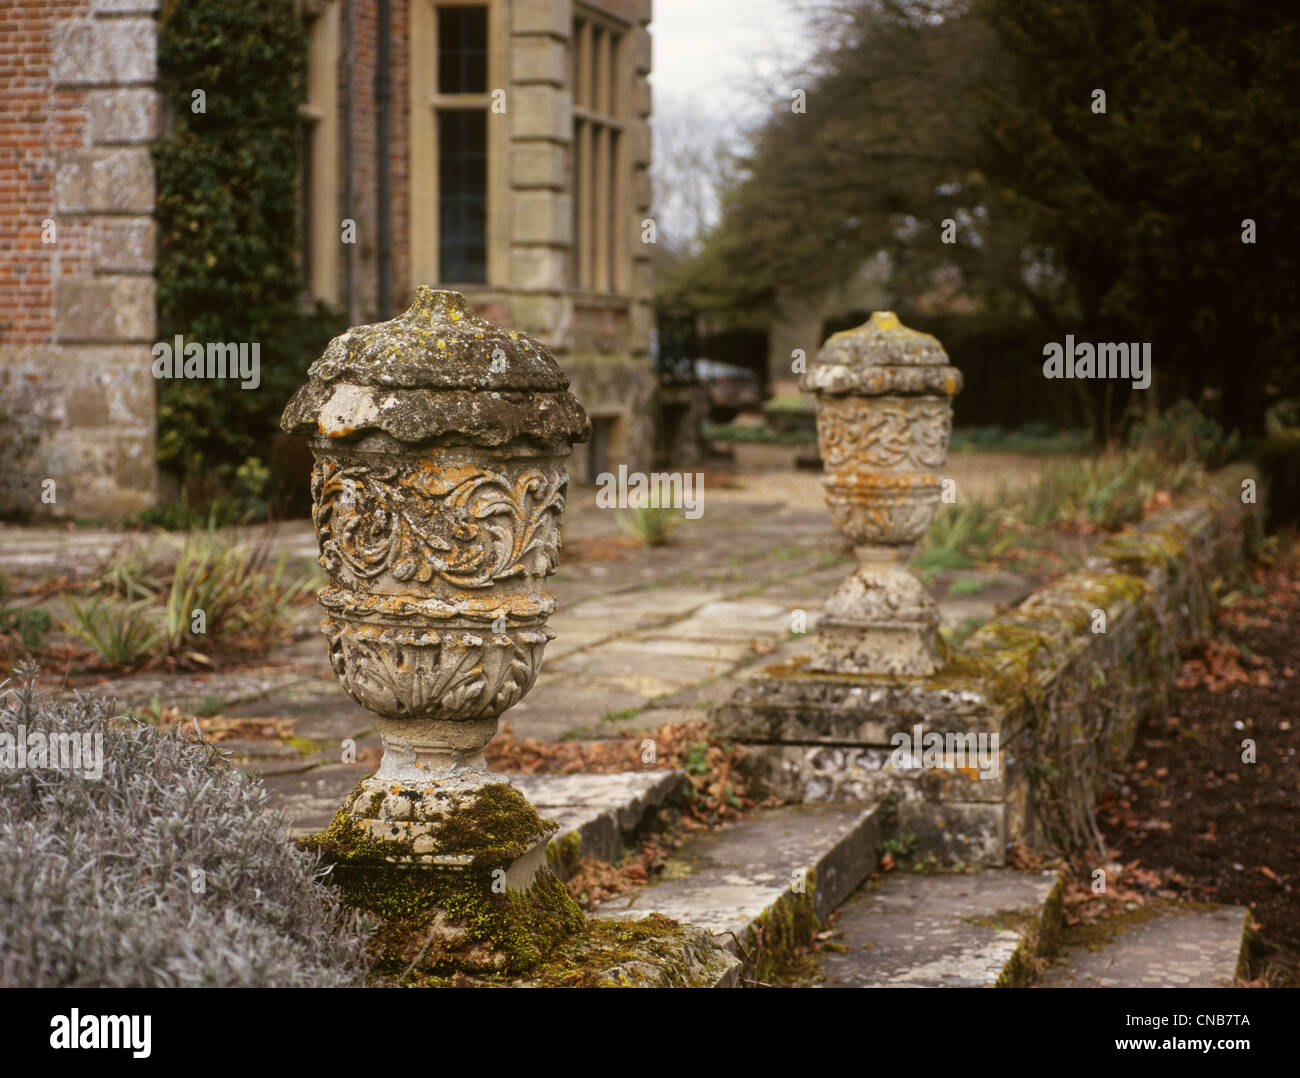 Middle Woodford Wiltshire Heale House and Garden Decorative urns Stock Photo